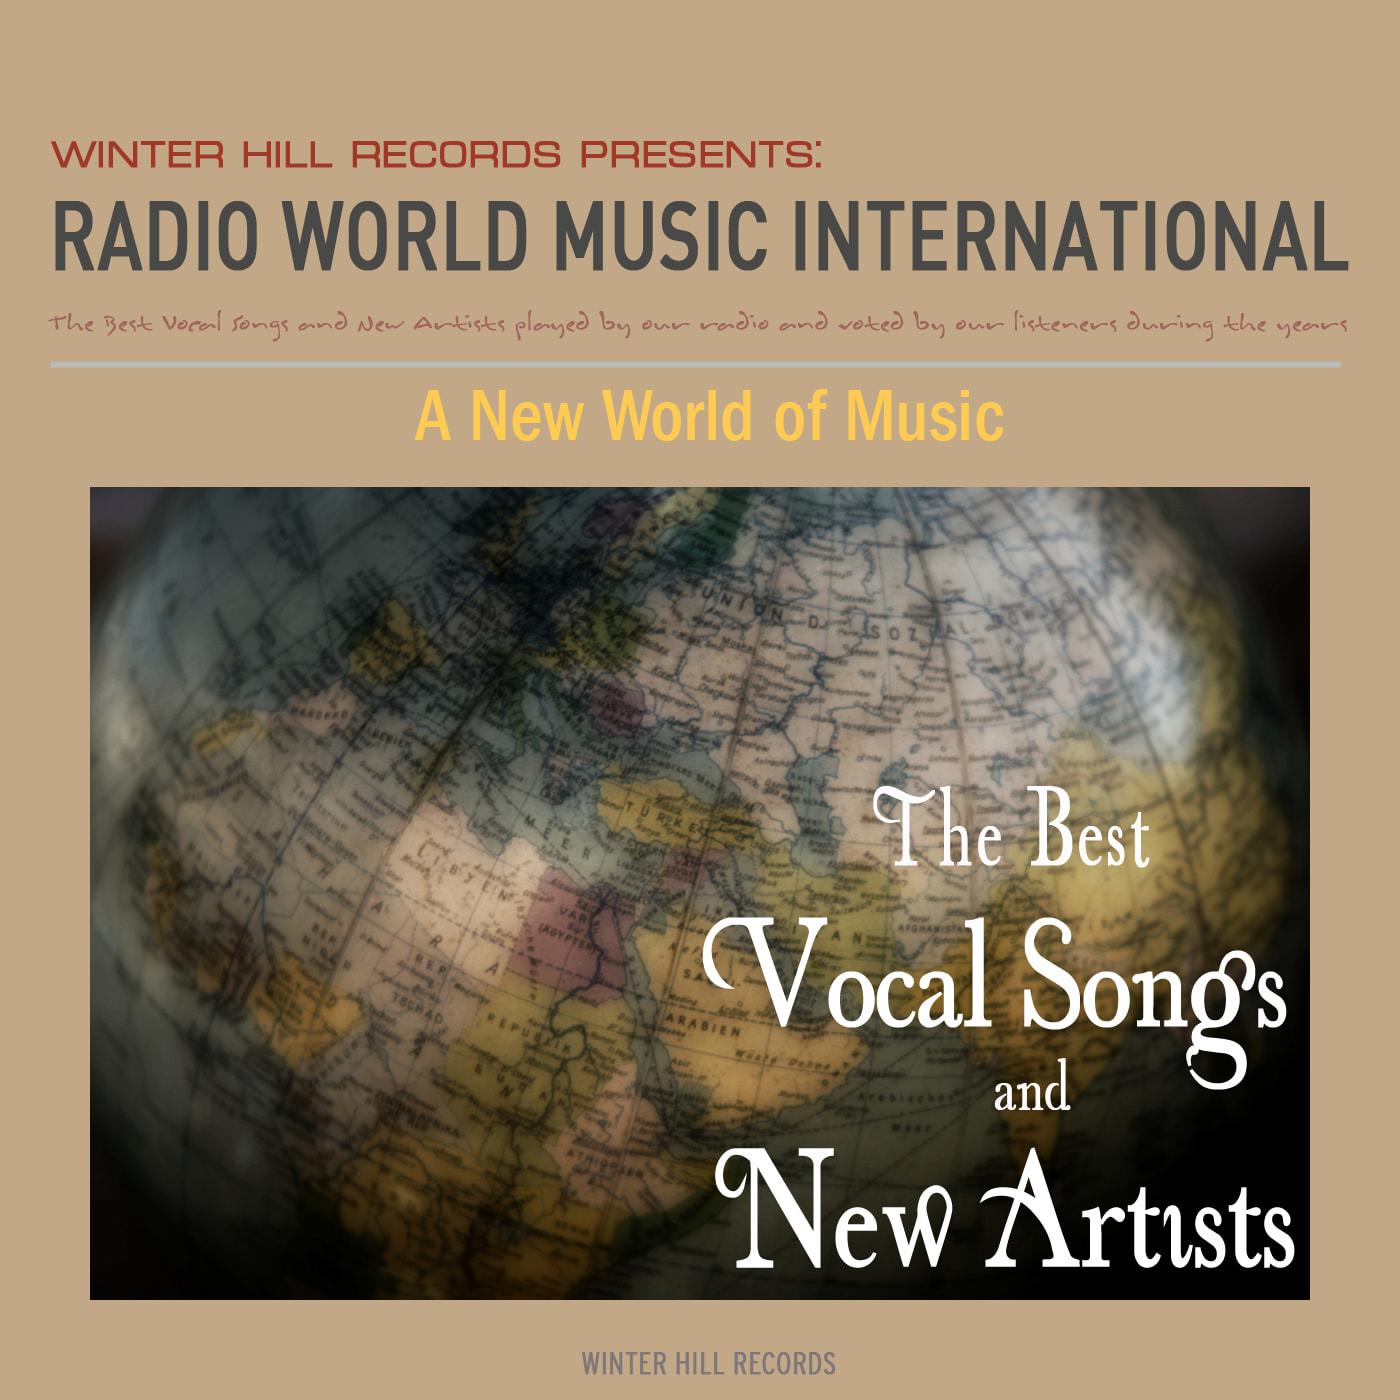 A New World of Music  The Best Vocal Songs and New Artists